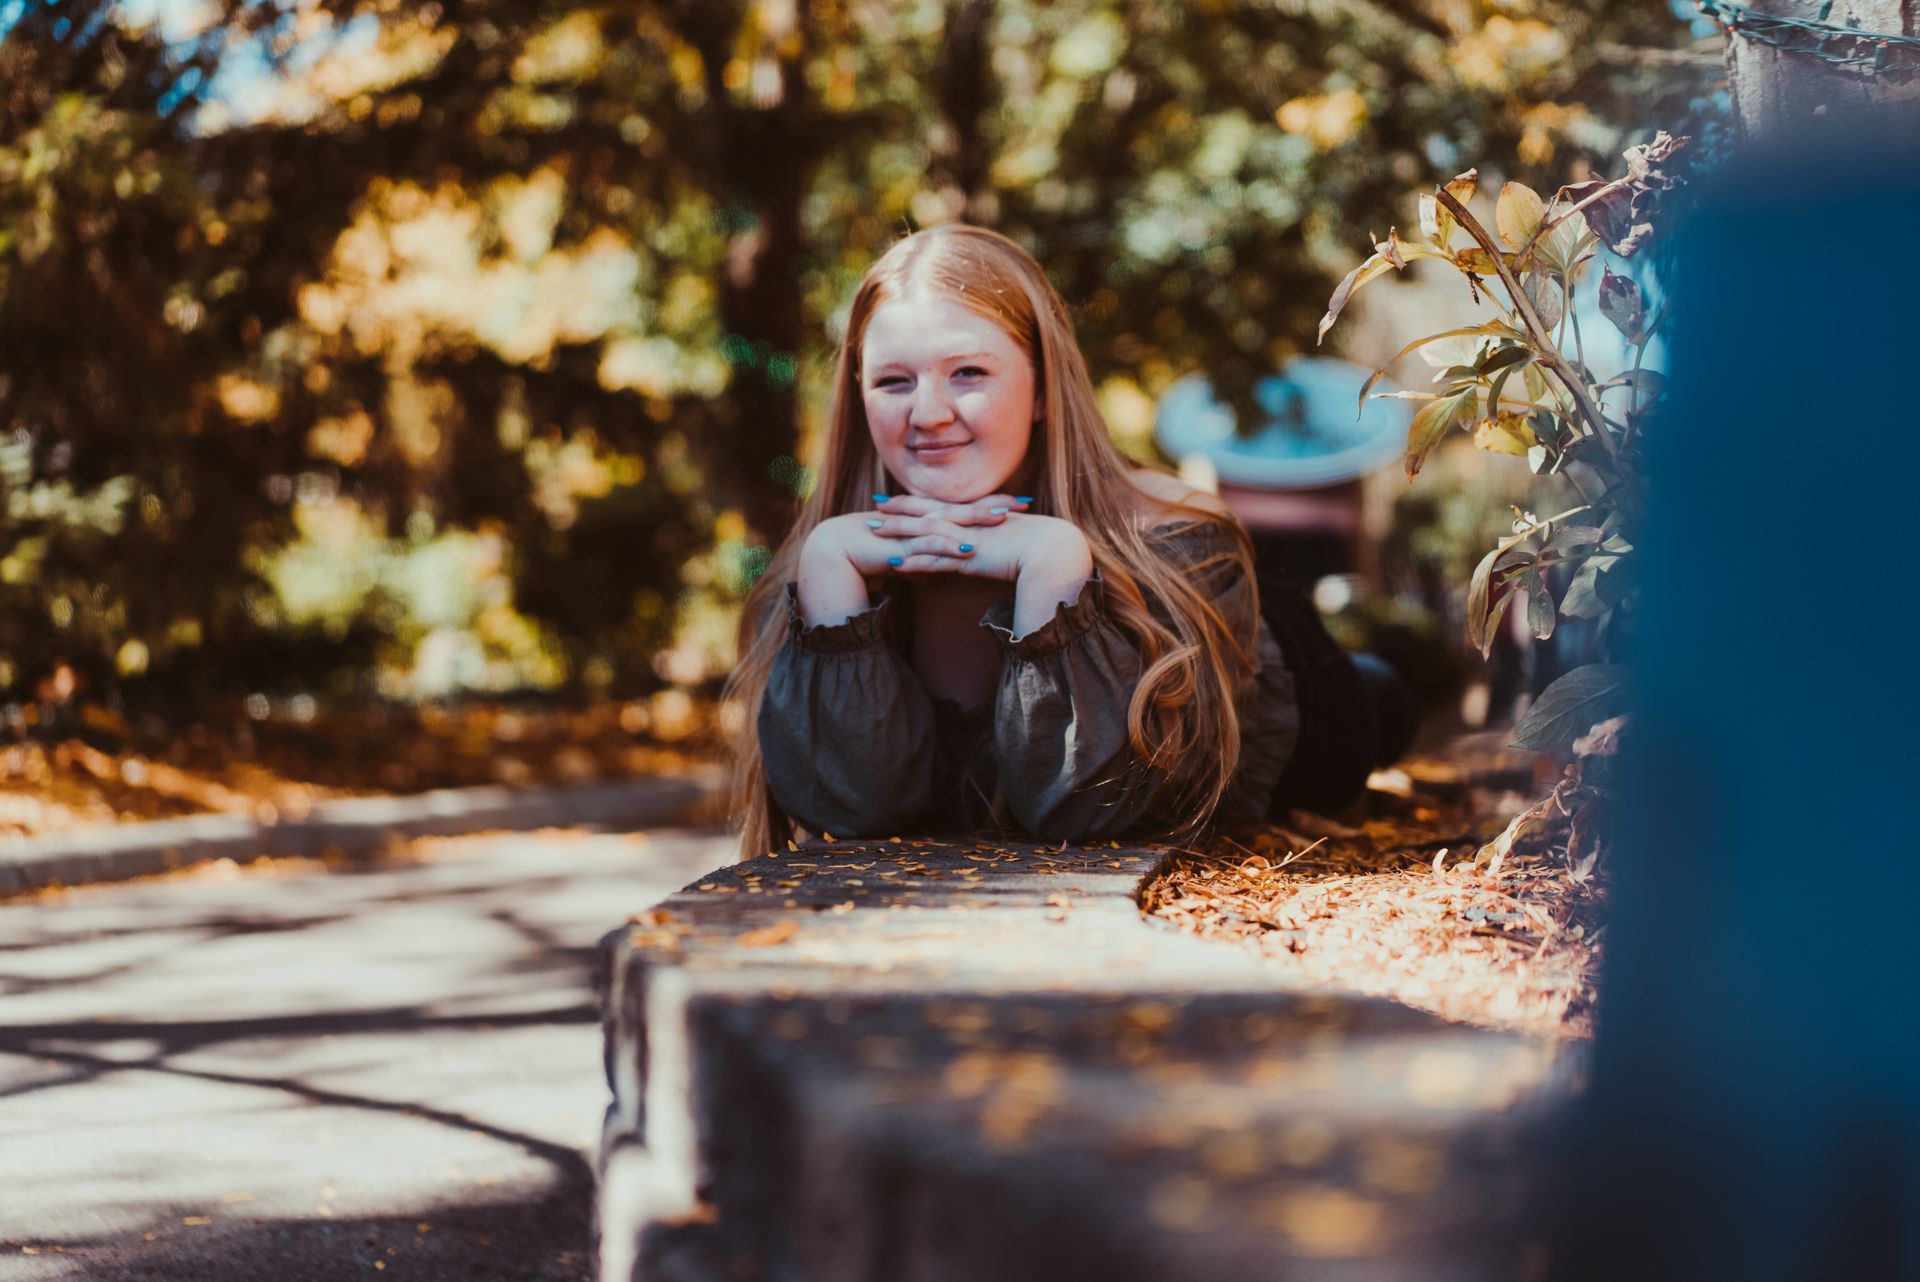 A high school senior is sitting on a bench in a park with her hands on her chin .